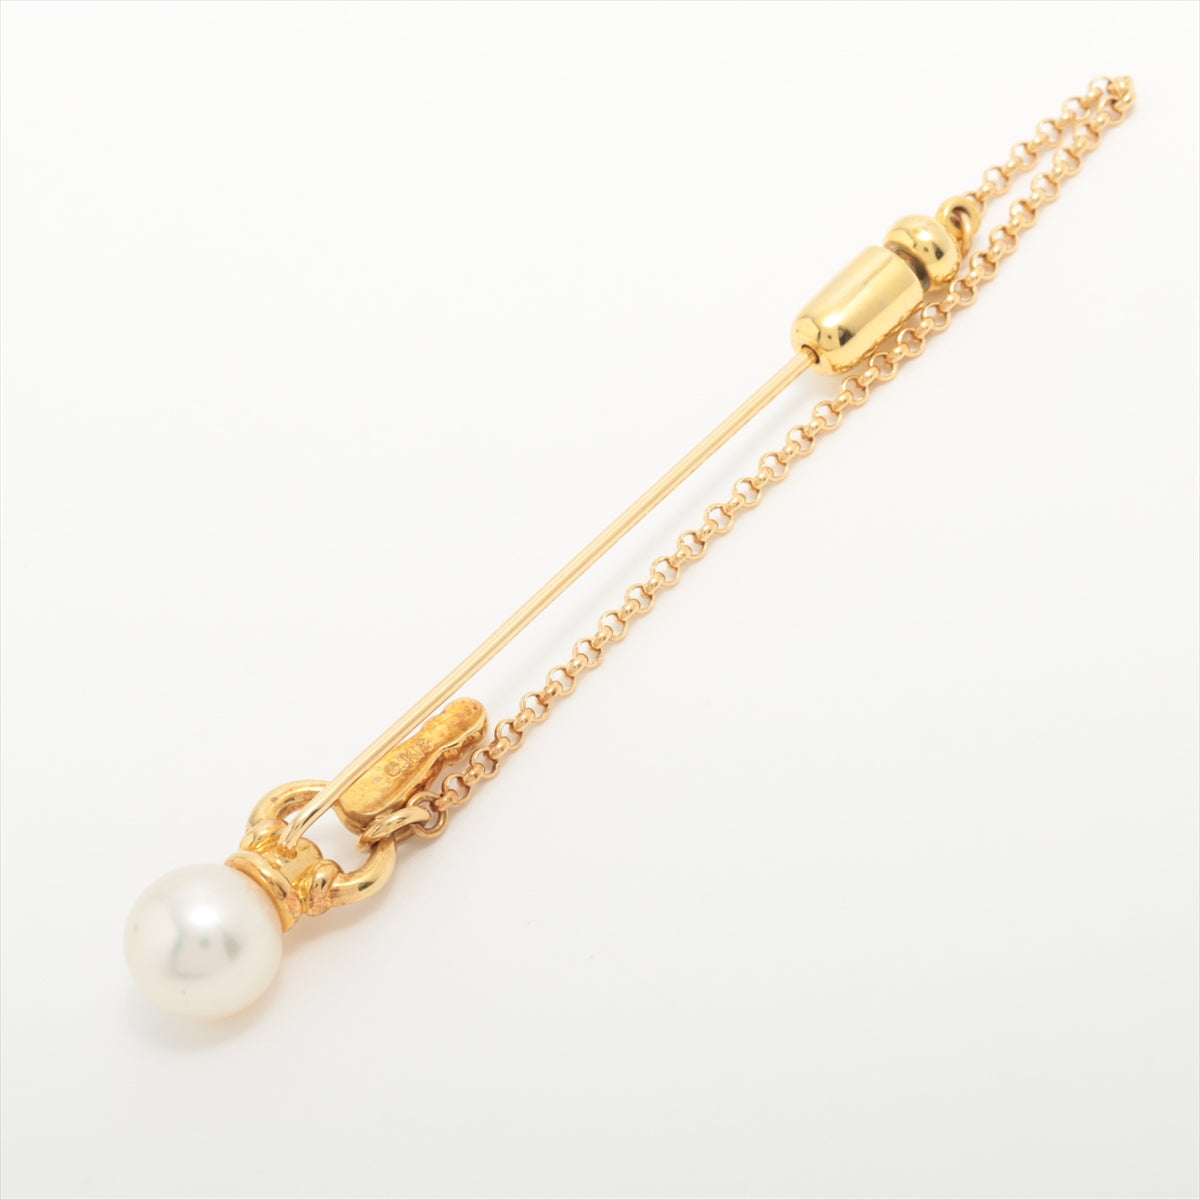 Mikimoto Pearl Tie pin K18(YG) 4.5g Approximately 8.0 mm in diameter